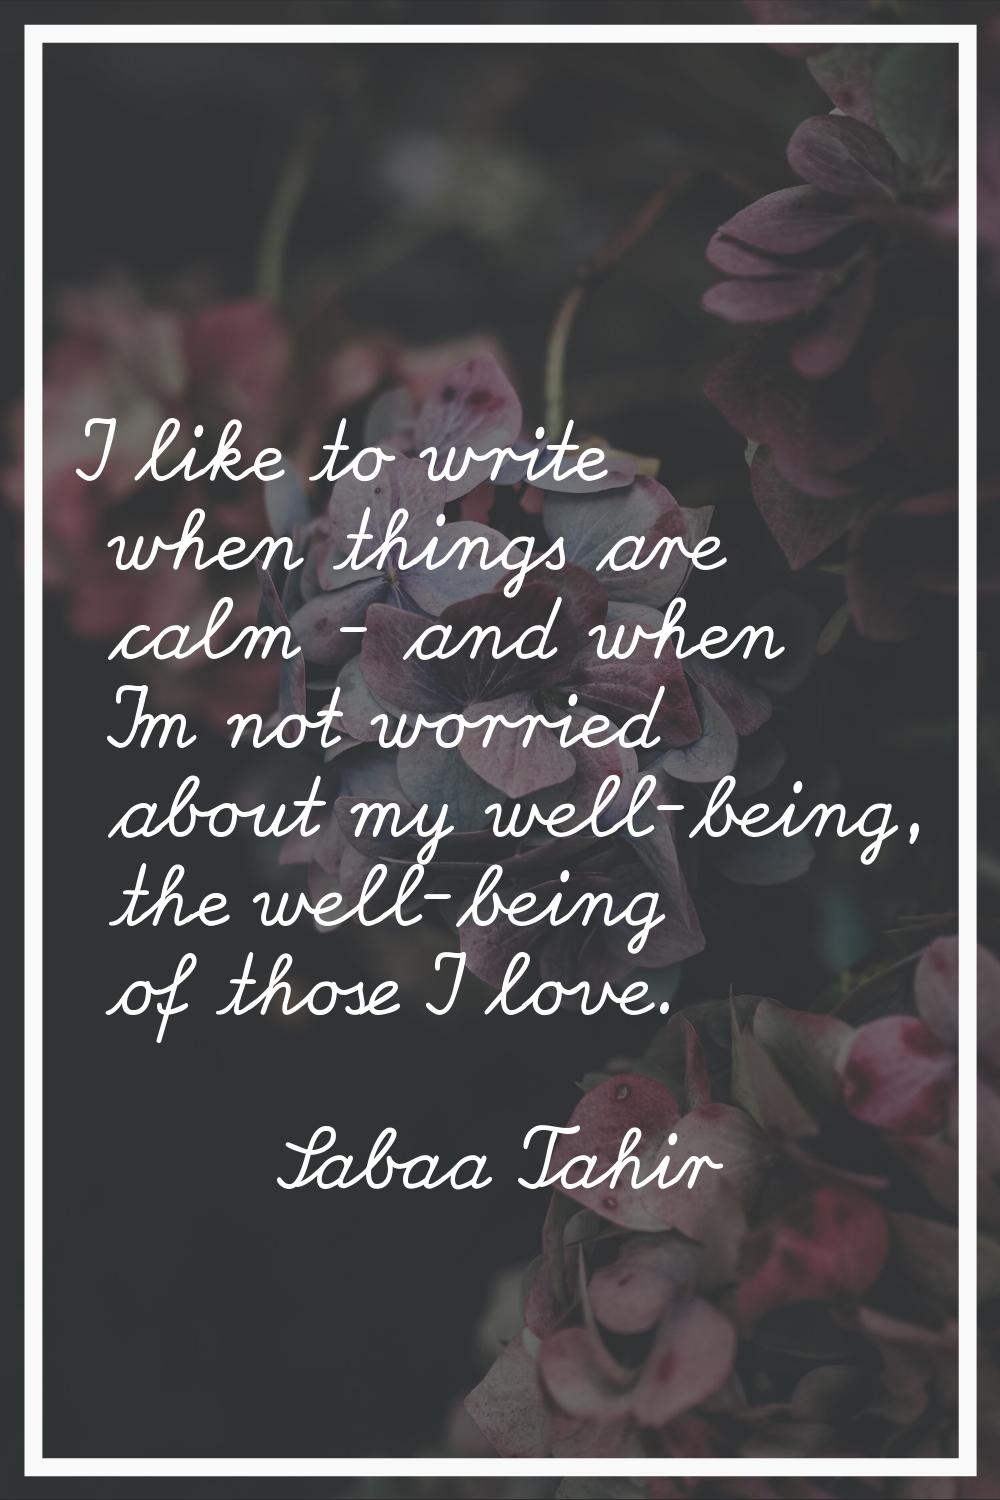 I like to write when things are calm - and when I'm not worried about my well-being, the well-being